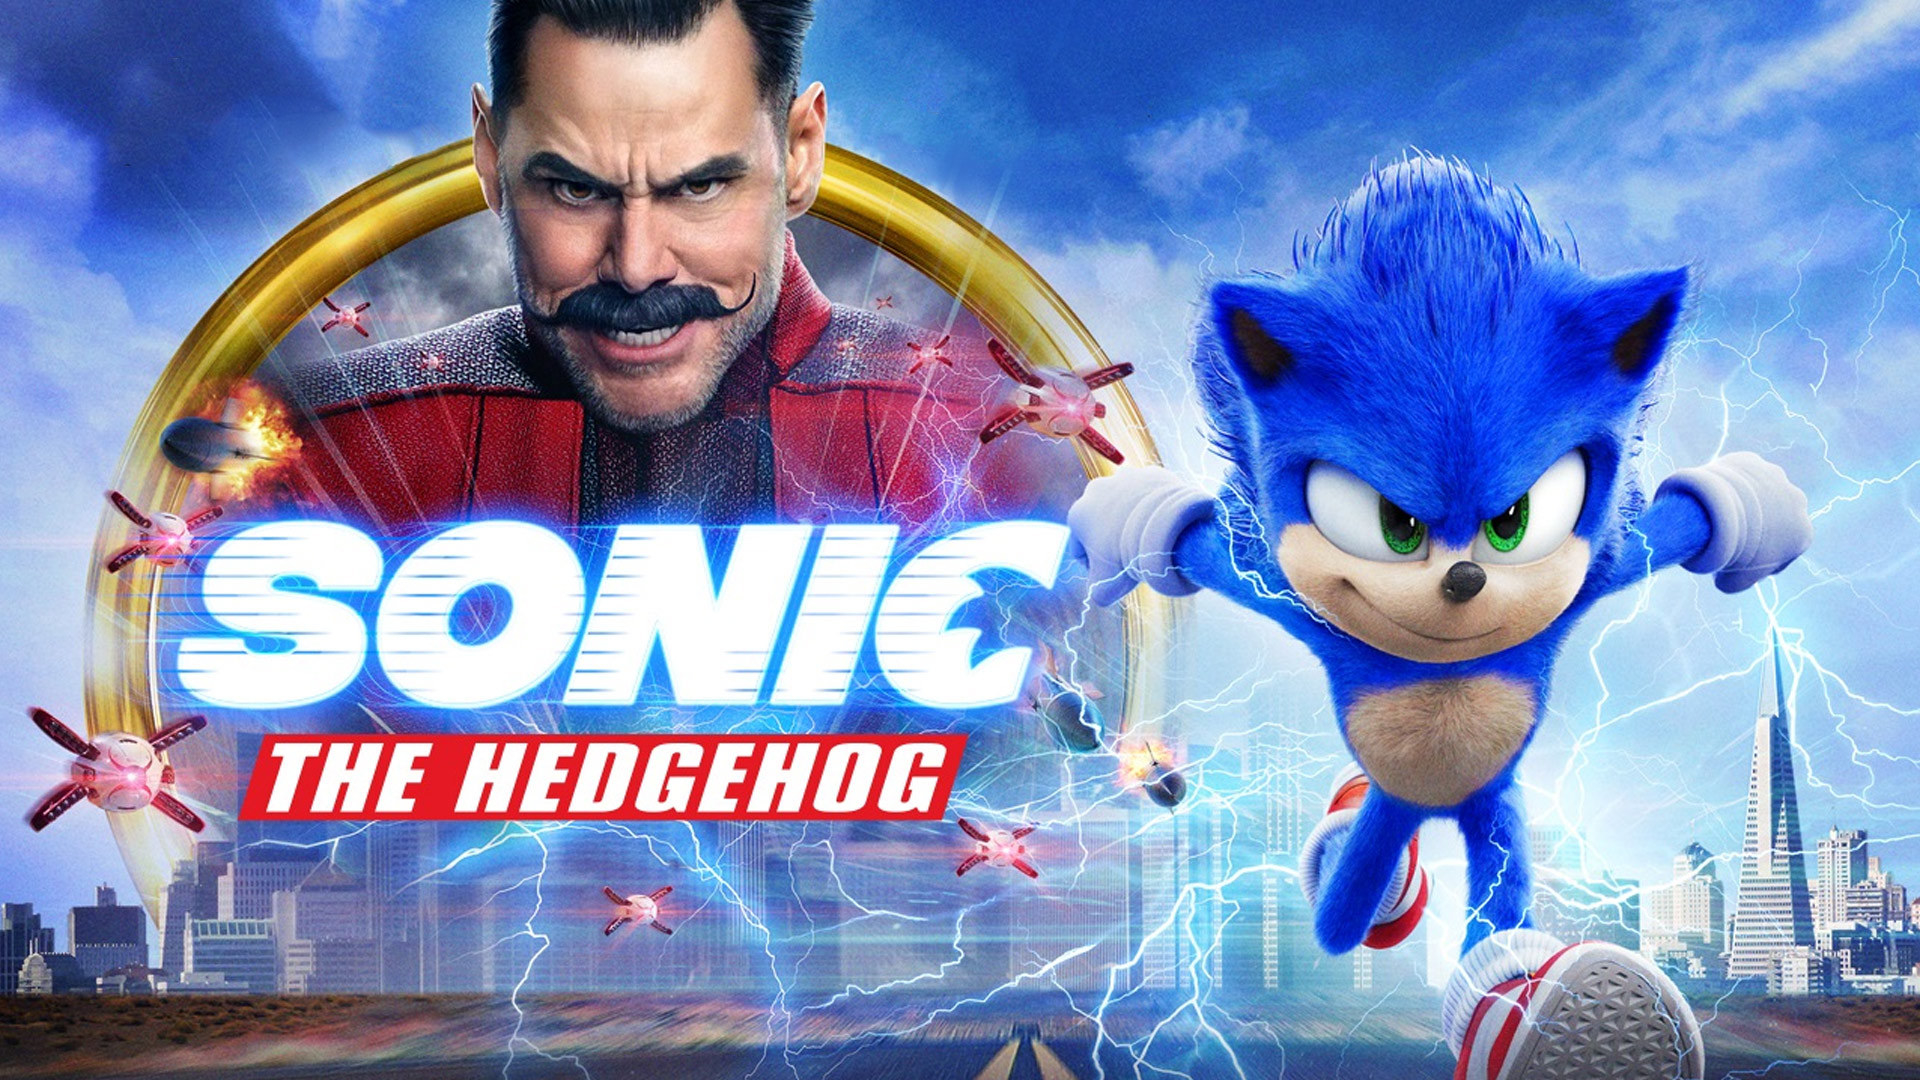 Poster for &quot;Sonic the Hedgehog&quot;